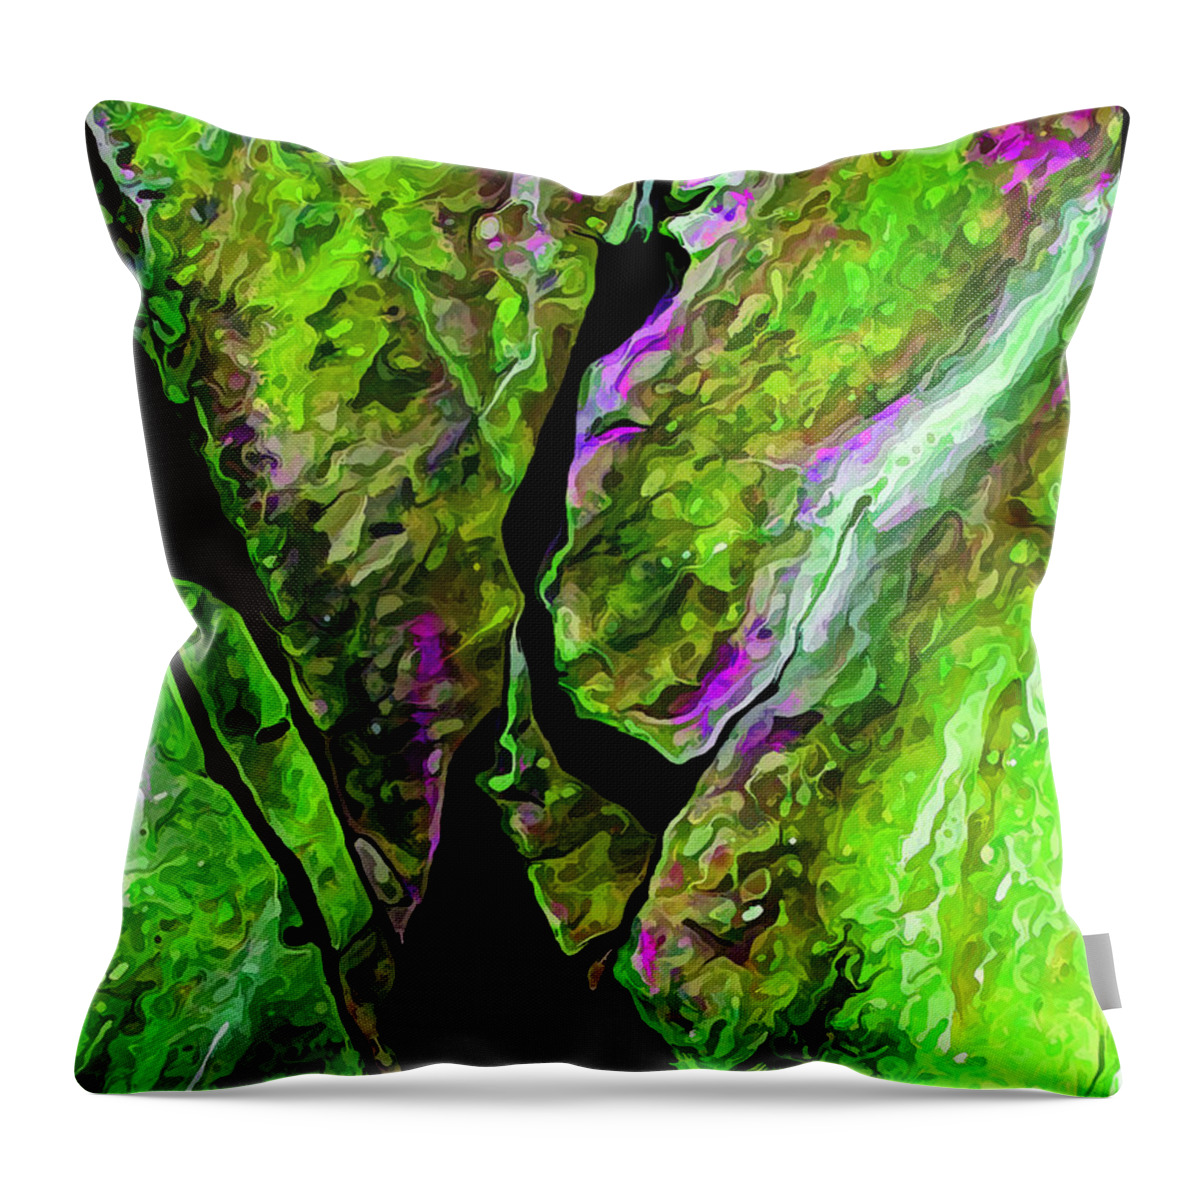 Nature Throw Pillow featuring the digital art Rock Art 20 by ABeautifulSky Photography by Bill Caldwell